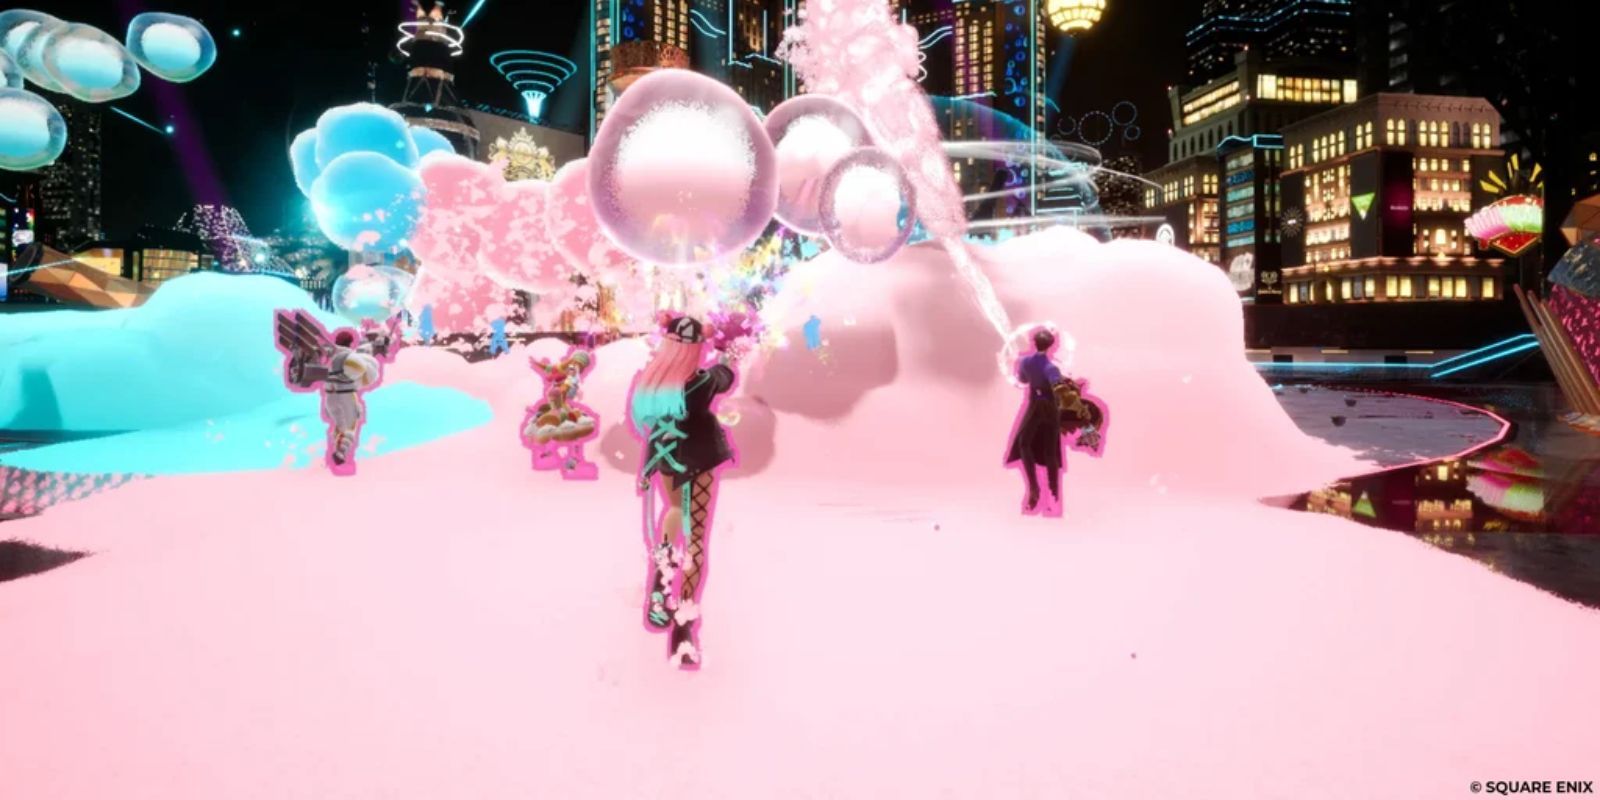 Foamstars game with several pink team characters shooting into an area